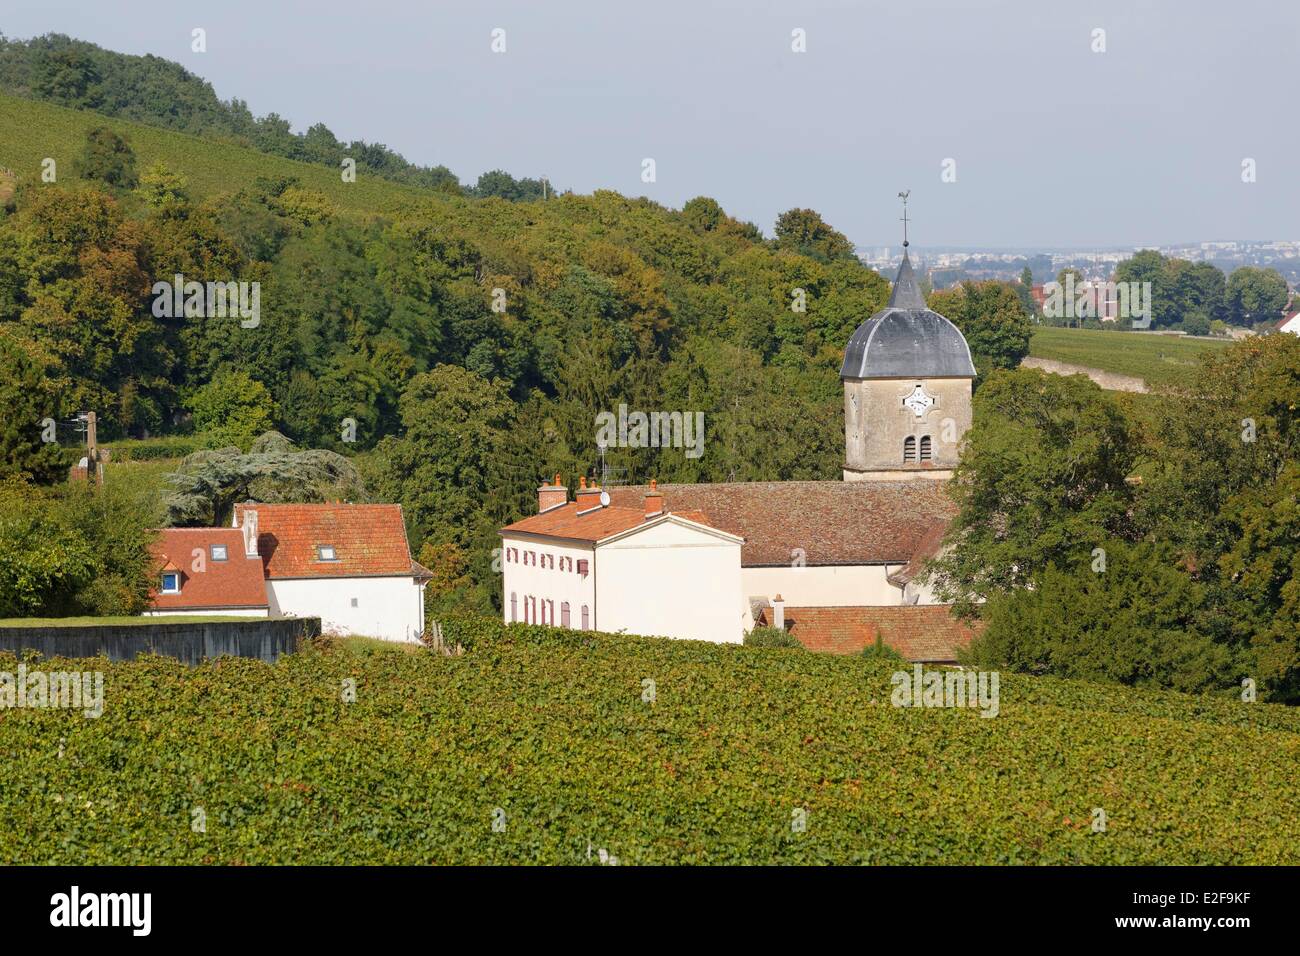 Frankreich, Cote d ' or, Chambolle Musigny, Bourgogne Weinberg, Côte de Nuits Weinberg Stockfoto